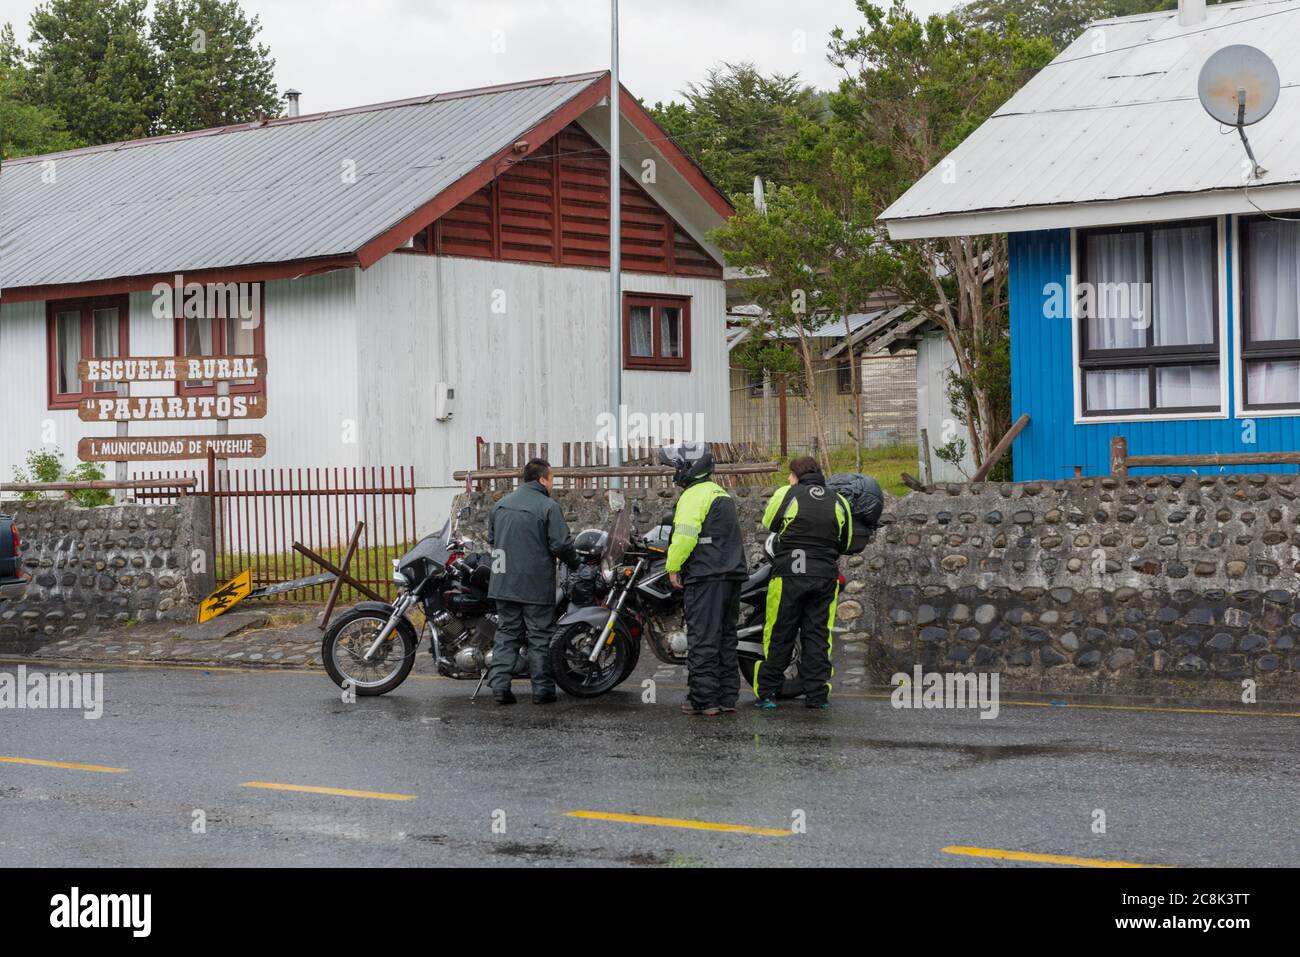 Motorcyclist at the Chile Argentina border crossing at Puyehue, Chile Stock Photo